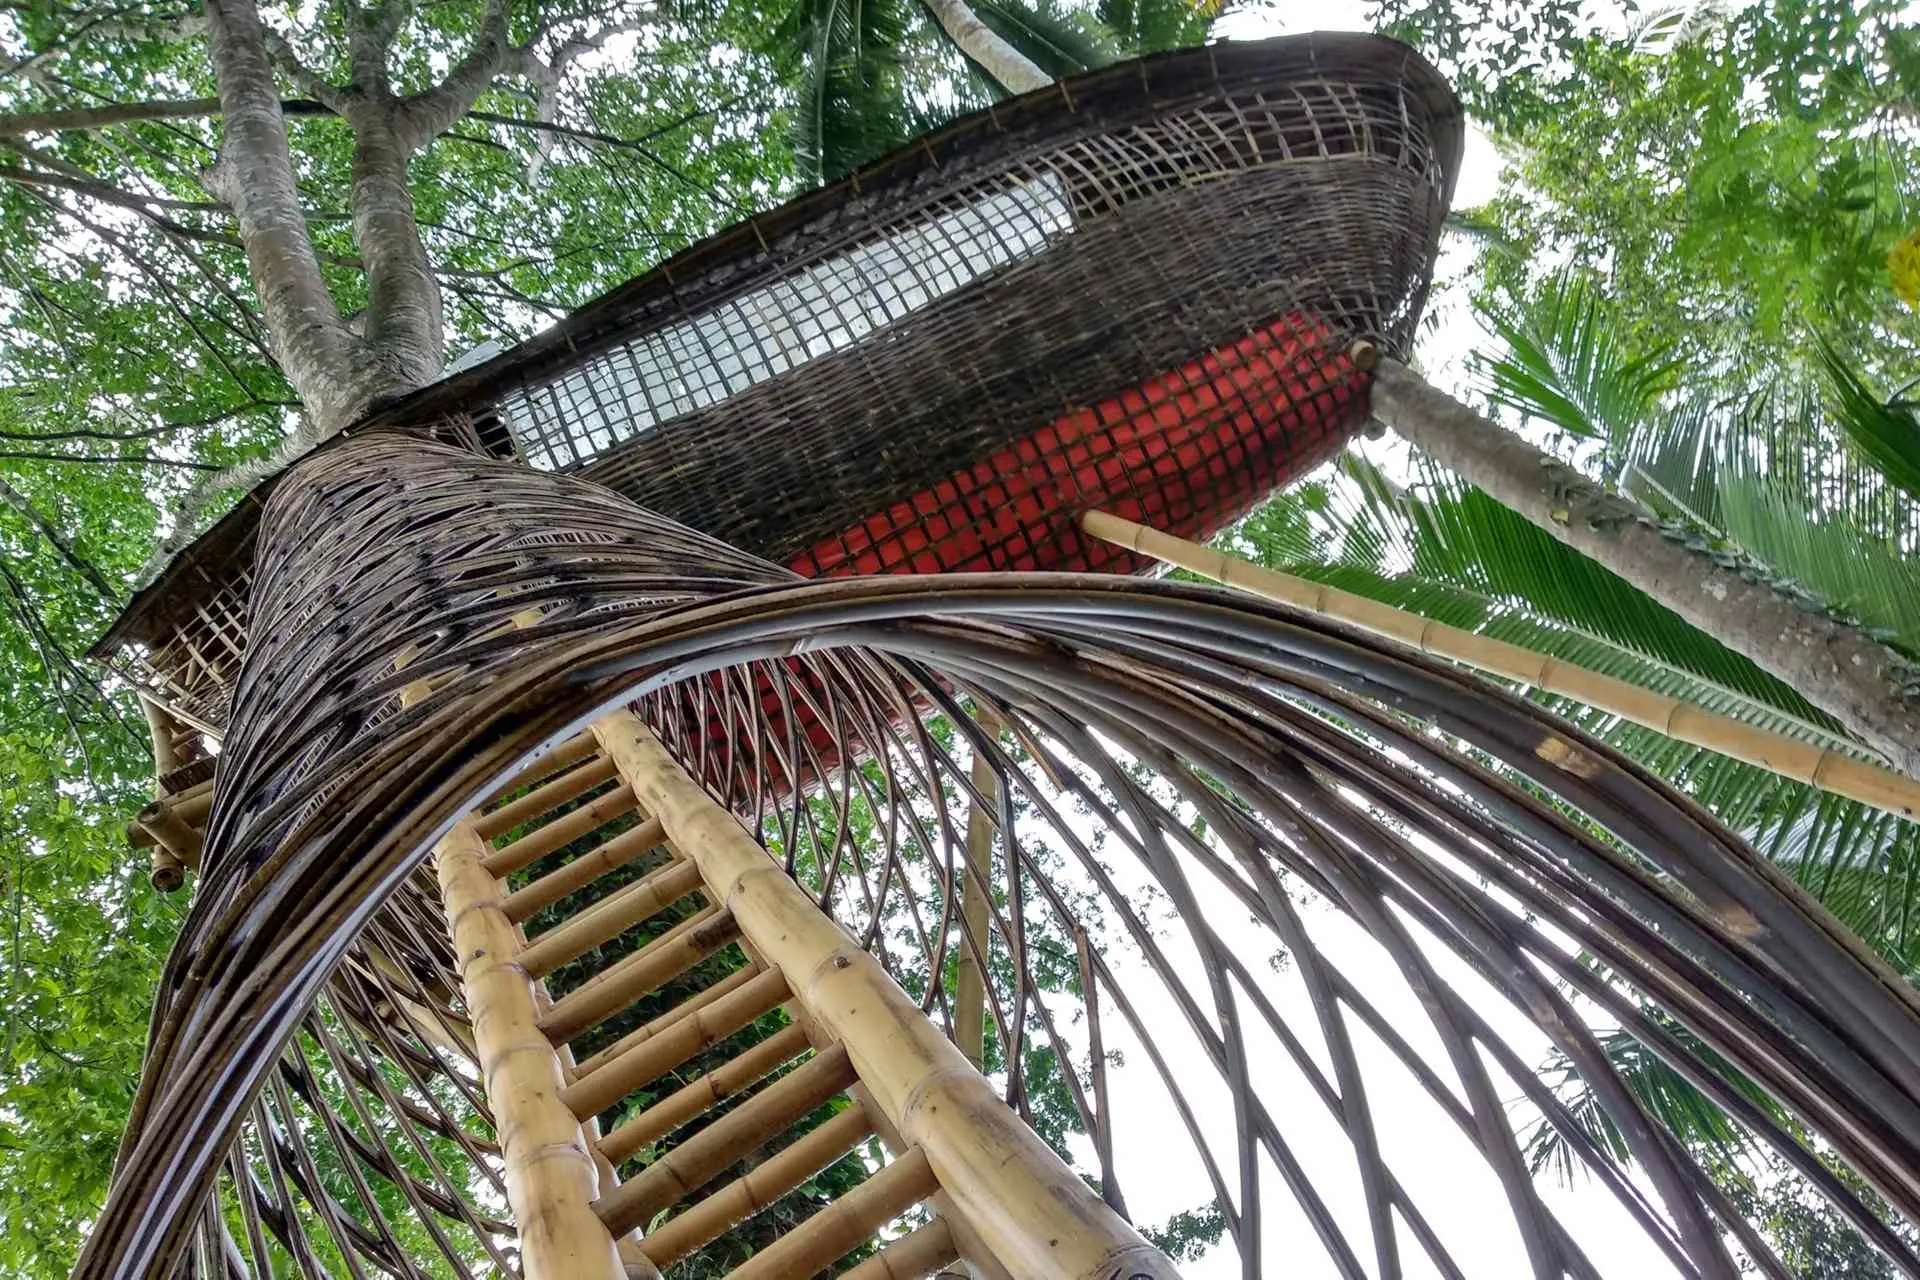 The cocoon tree house. Photo by Rokma